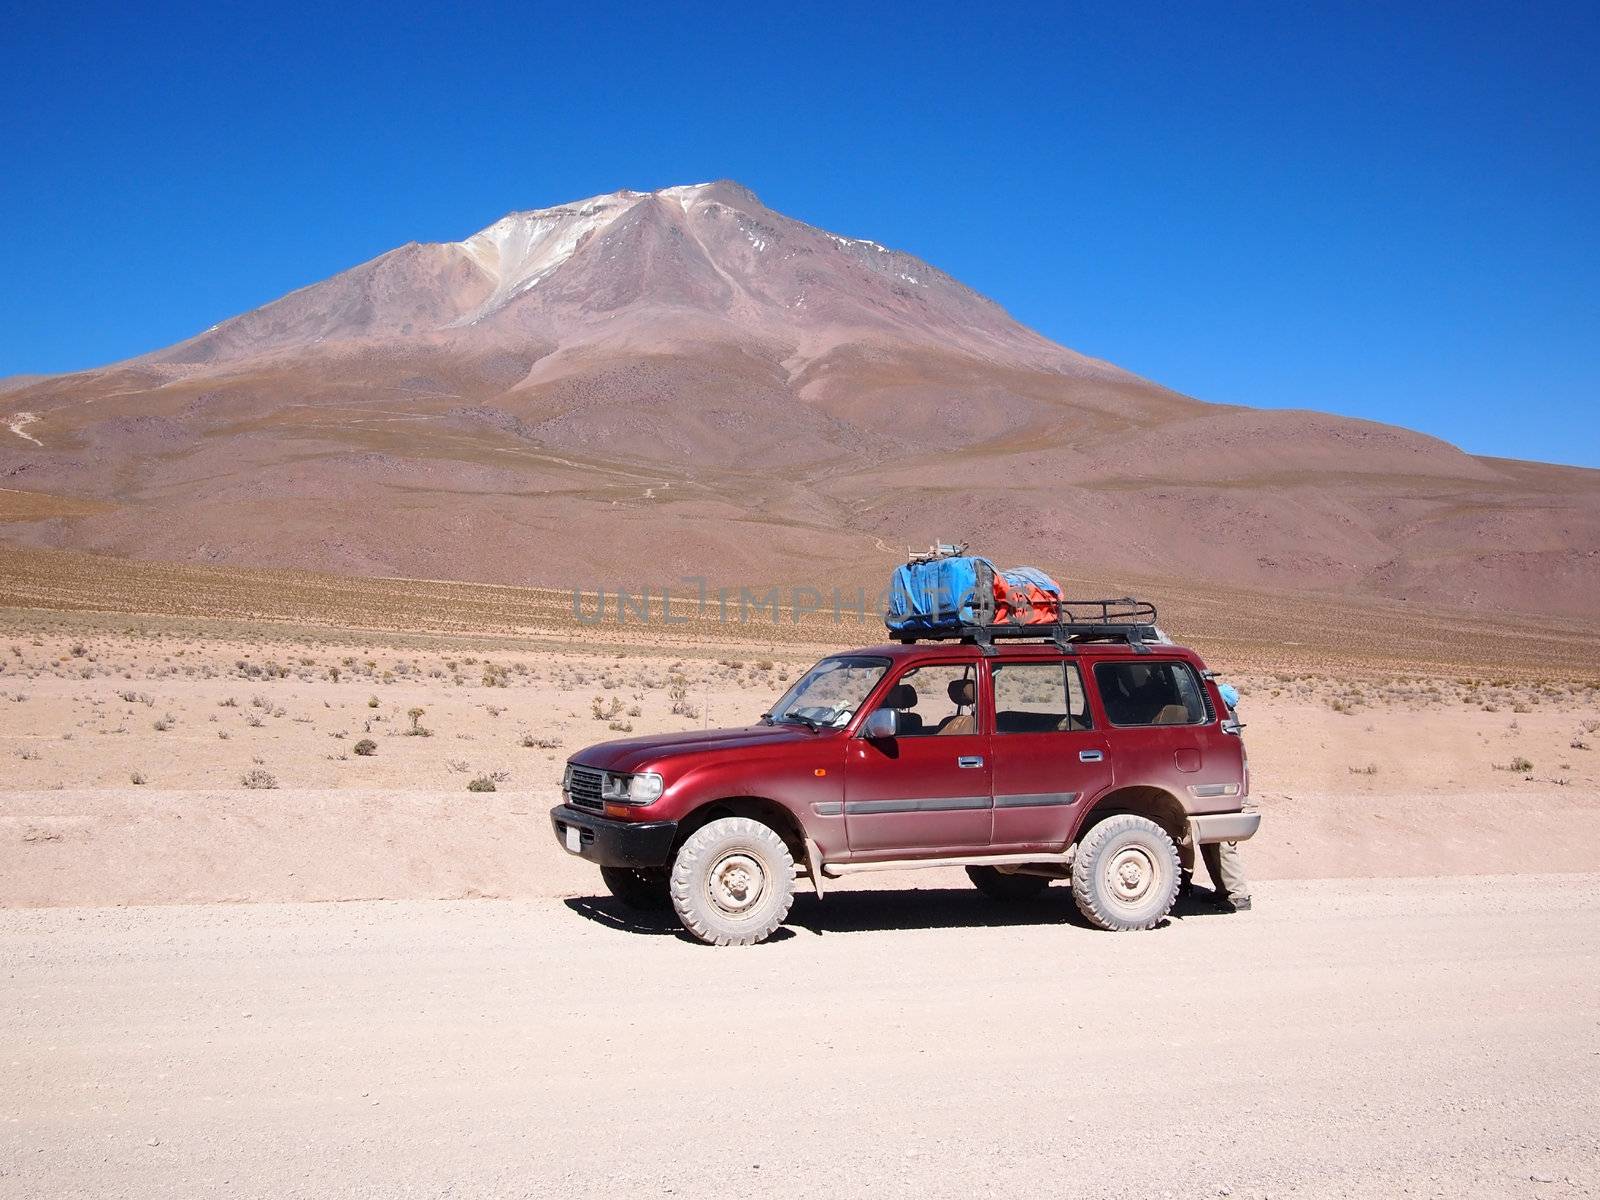 Four-wheel drive vehicle in Bolivia desert by pljvv